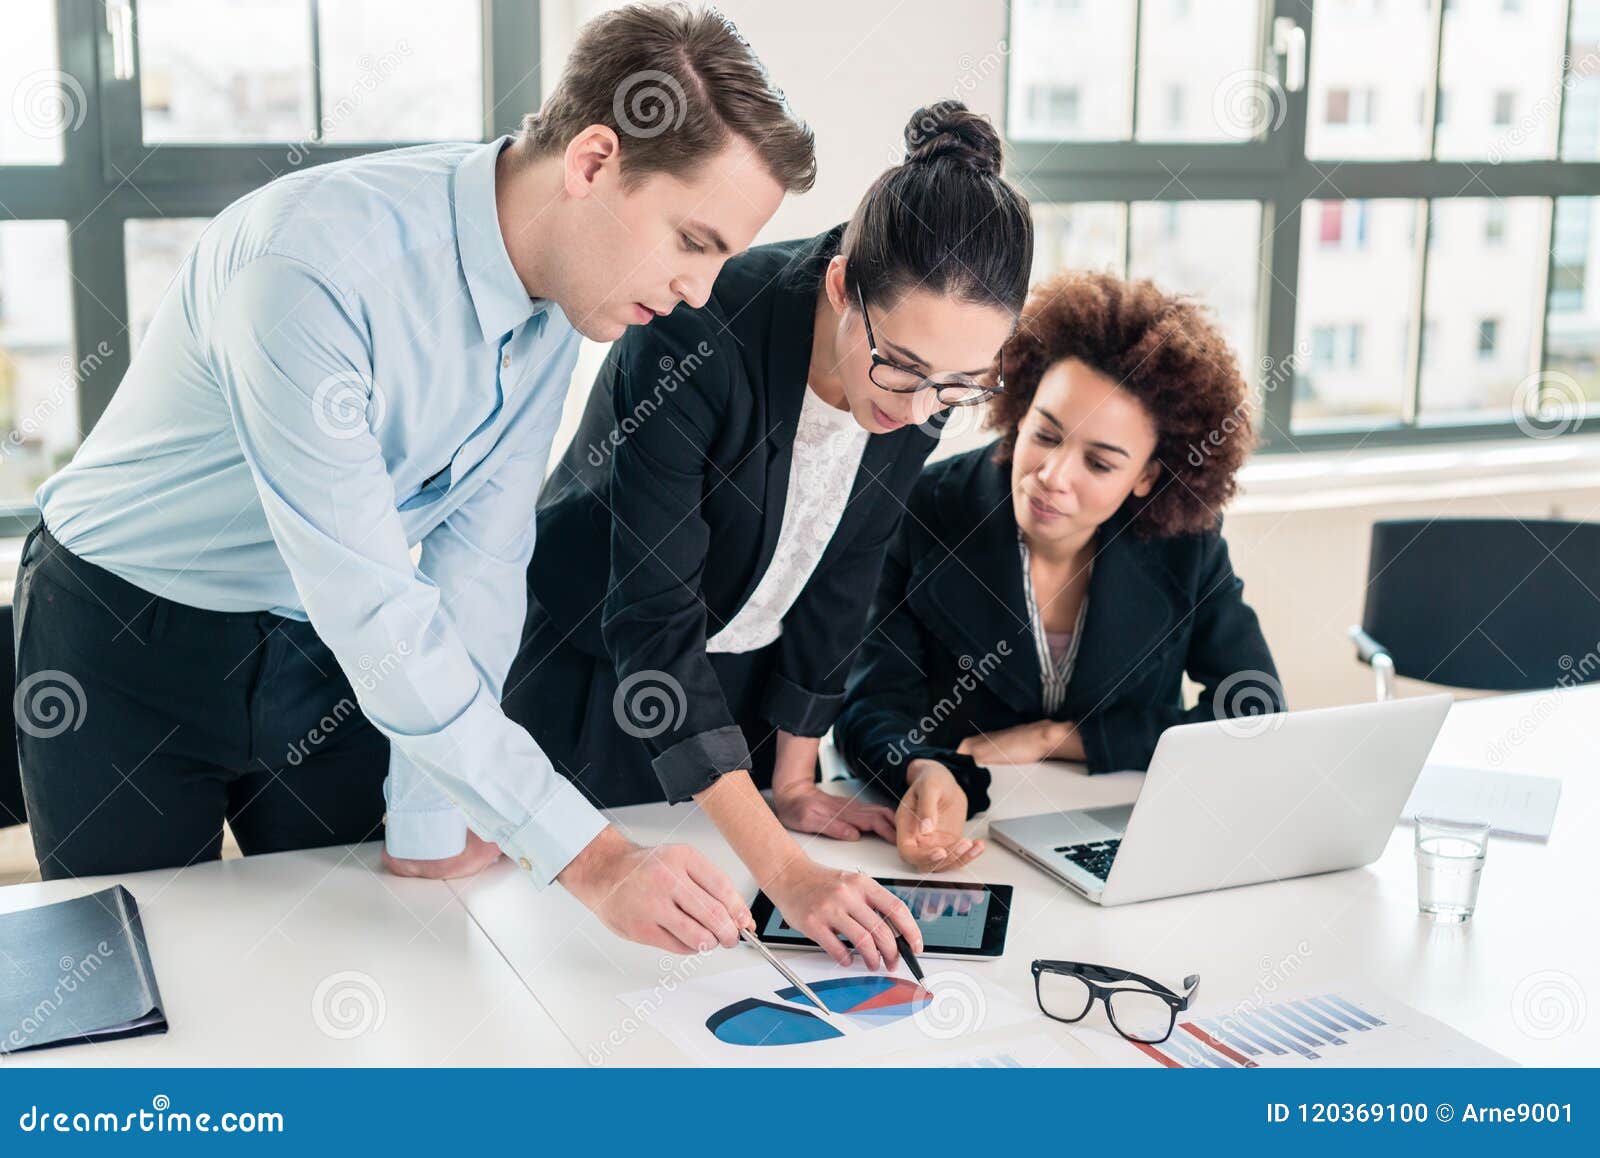 business experts interpreting pie chart printed on paper